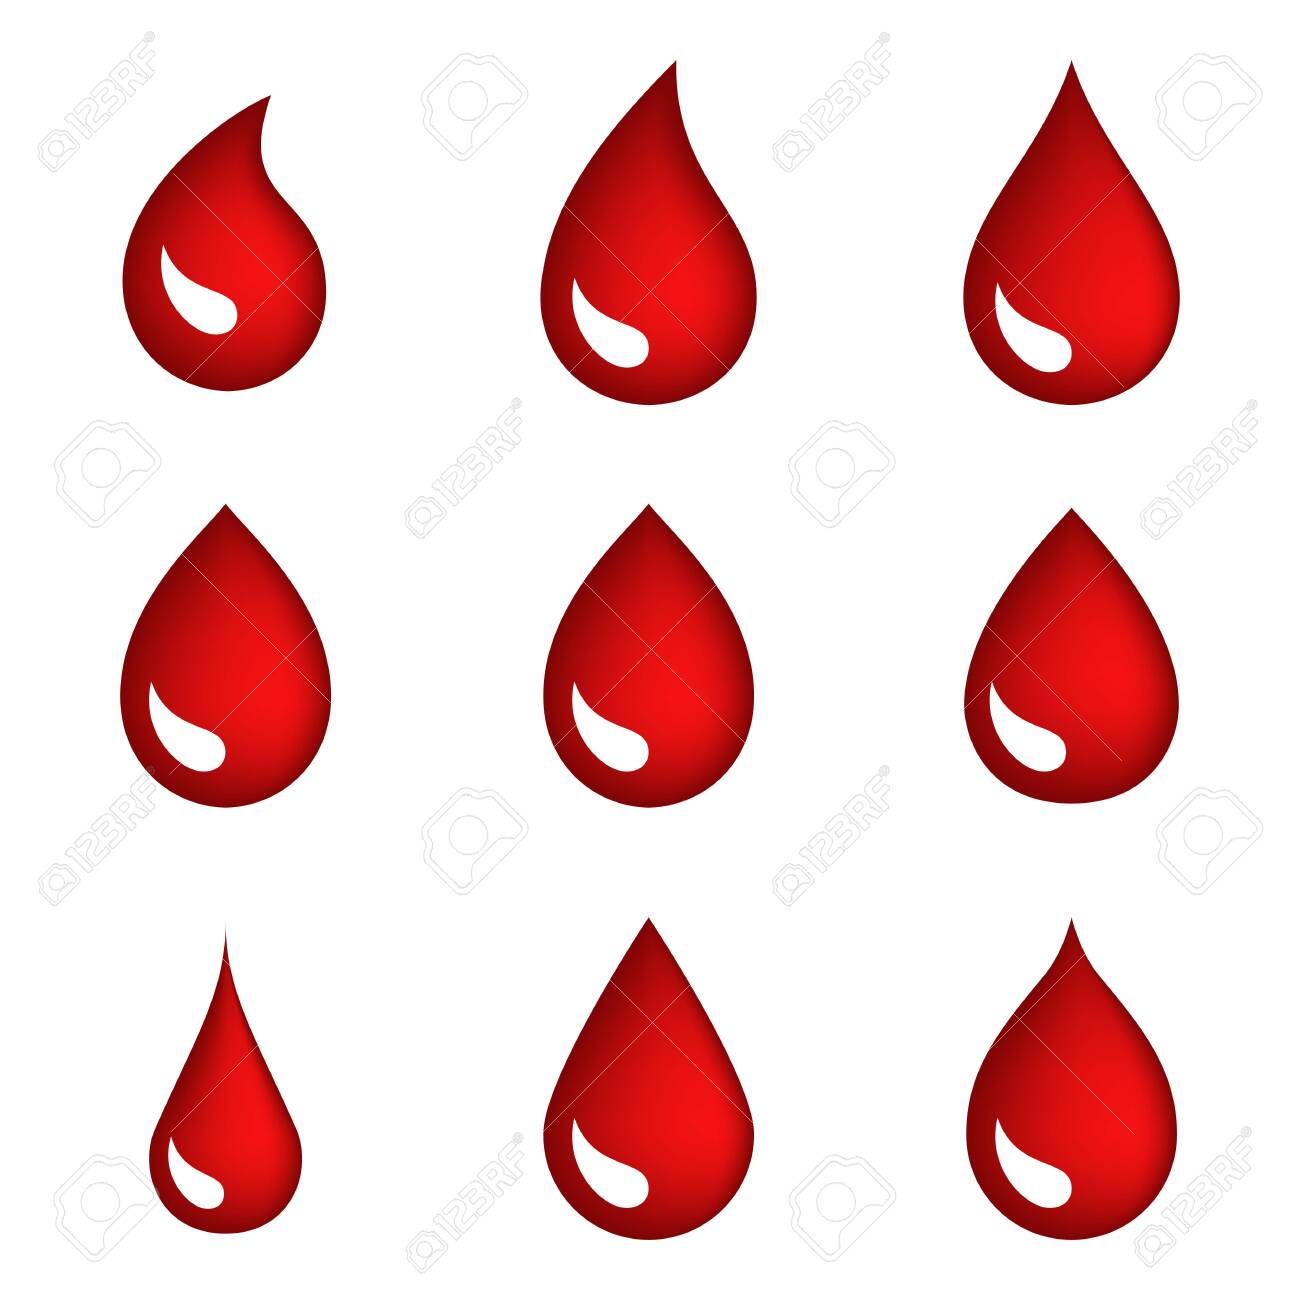 Red Blood Drops Icons Or Bleeding Symbols Collection Isolated